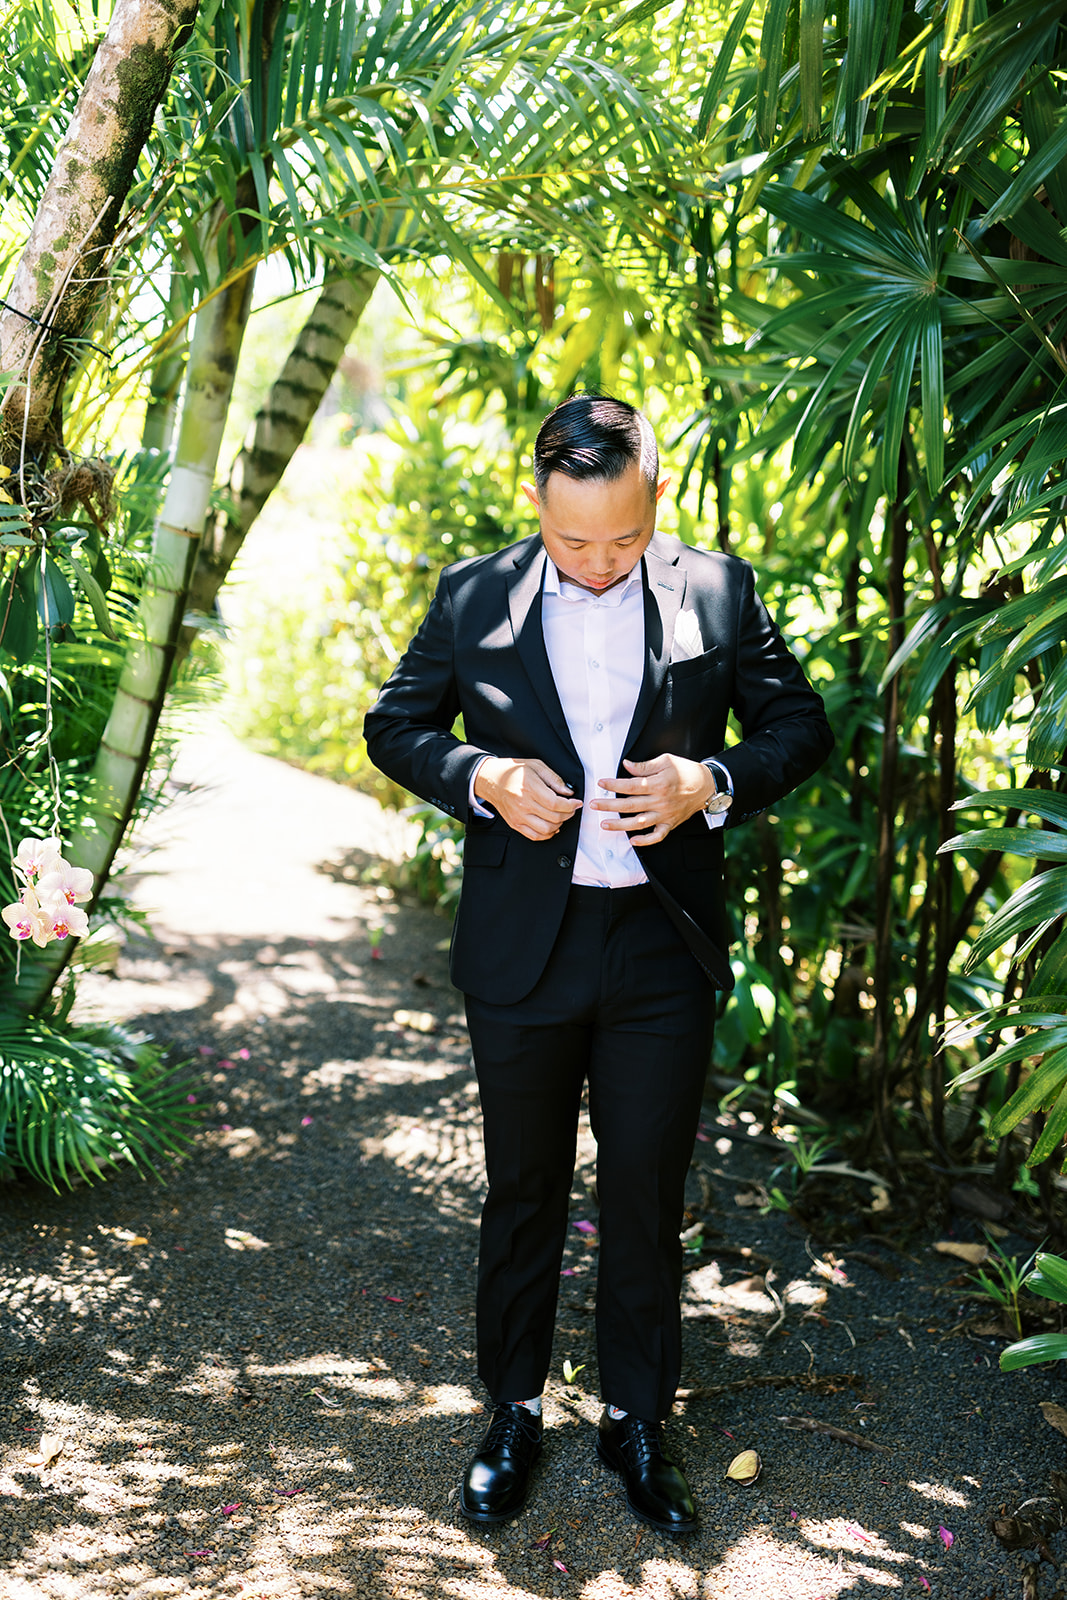 A groom in a black suit fastening his jacket amidst lush greenery captured by Oahu Wedding Photographer